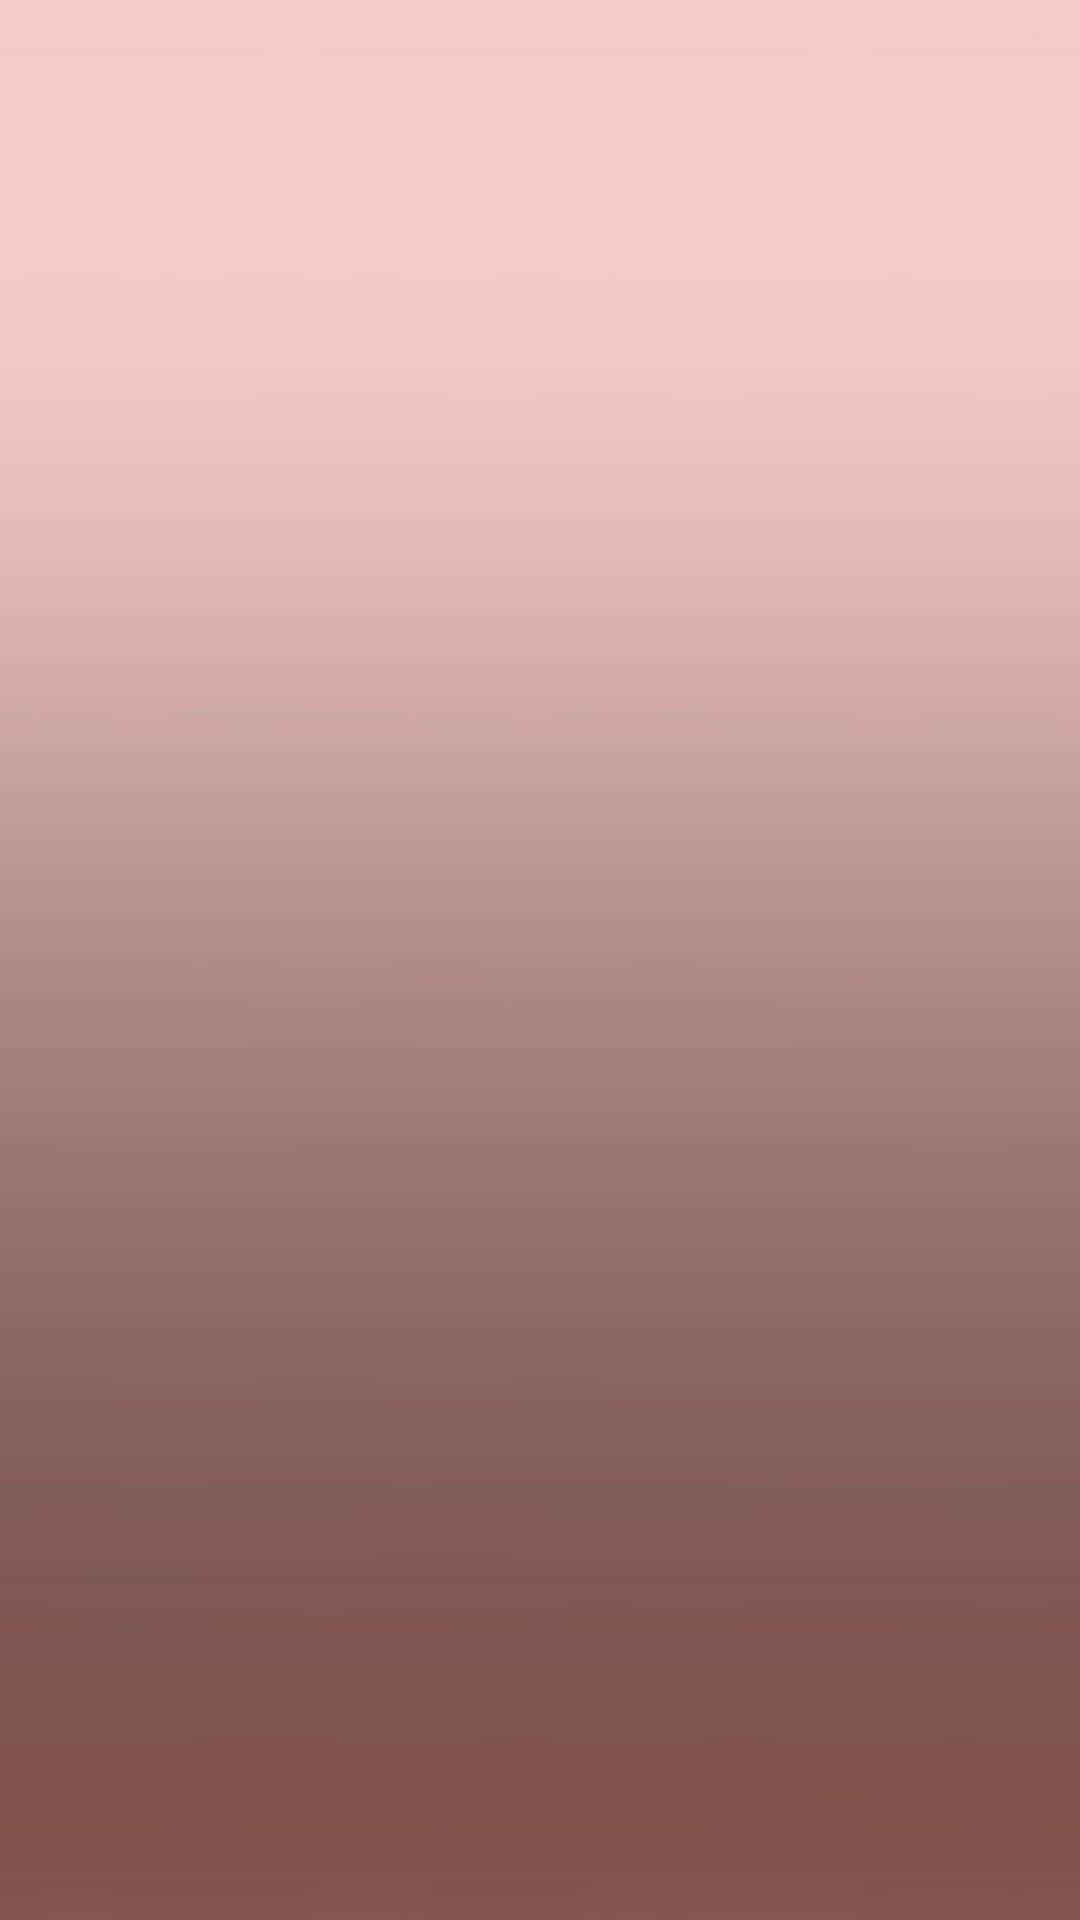 Solid Gradient Rose Gold Iphone Wallpaper